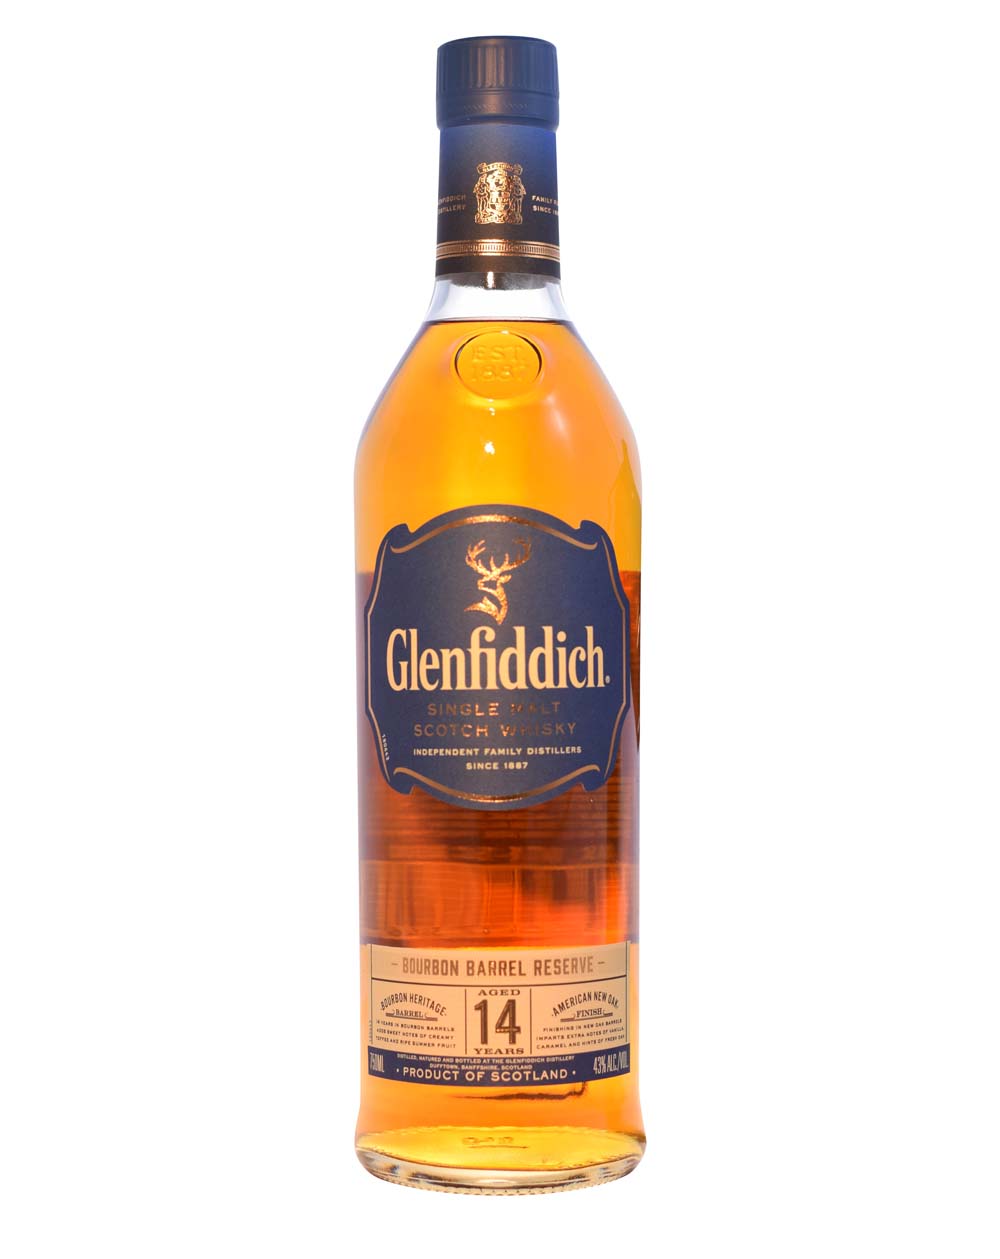 Glenfiddich Bourbon Barrel Reserve 14 Years Old Musthave Malts MHM